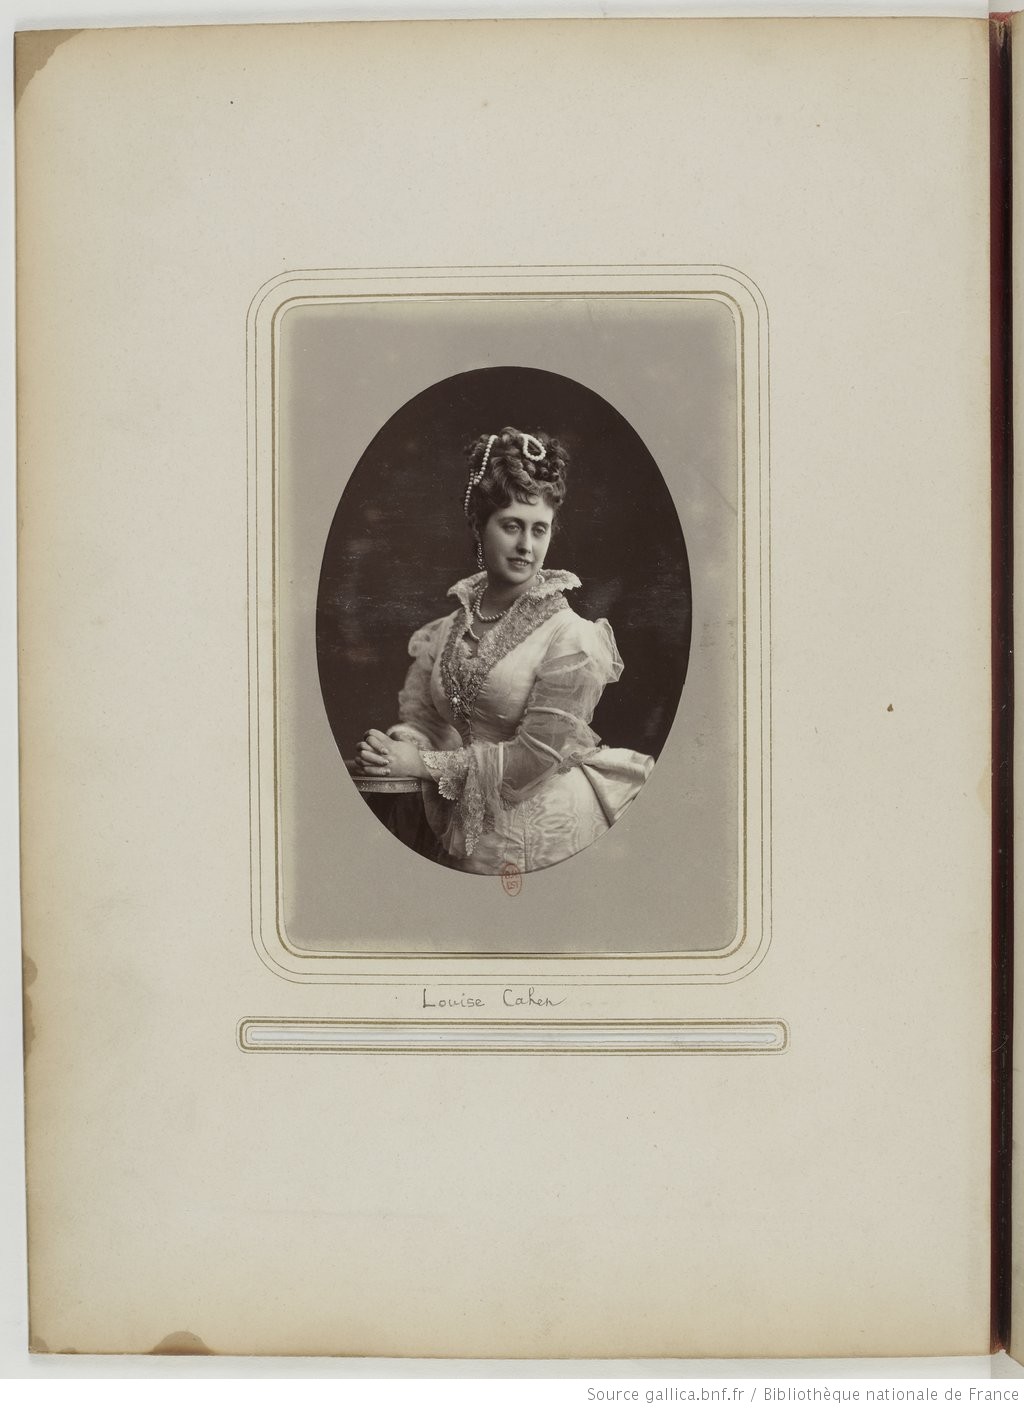 Photograph of Louise Cahen d'Anvers.